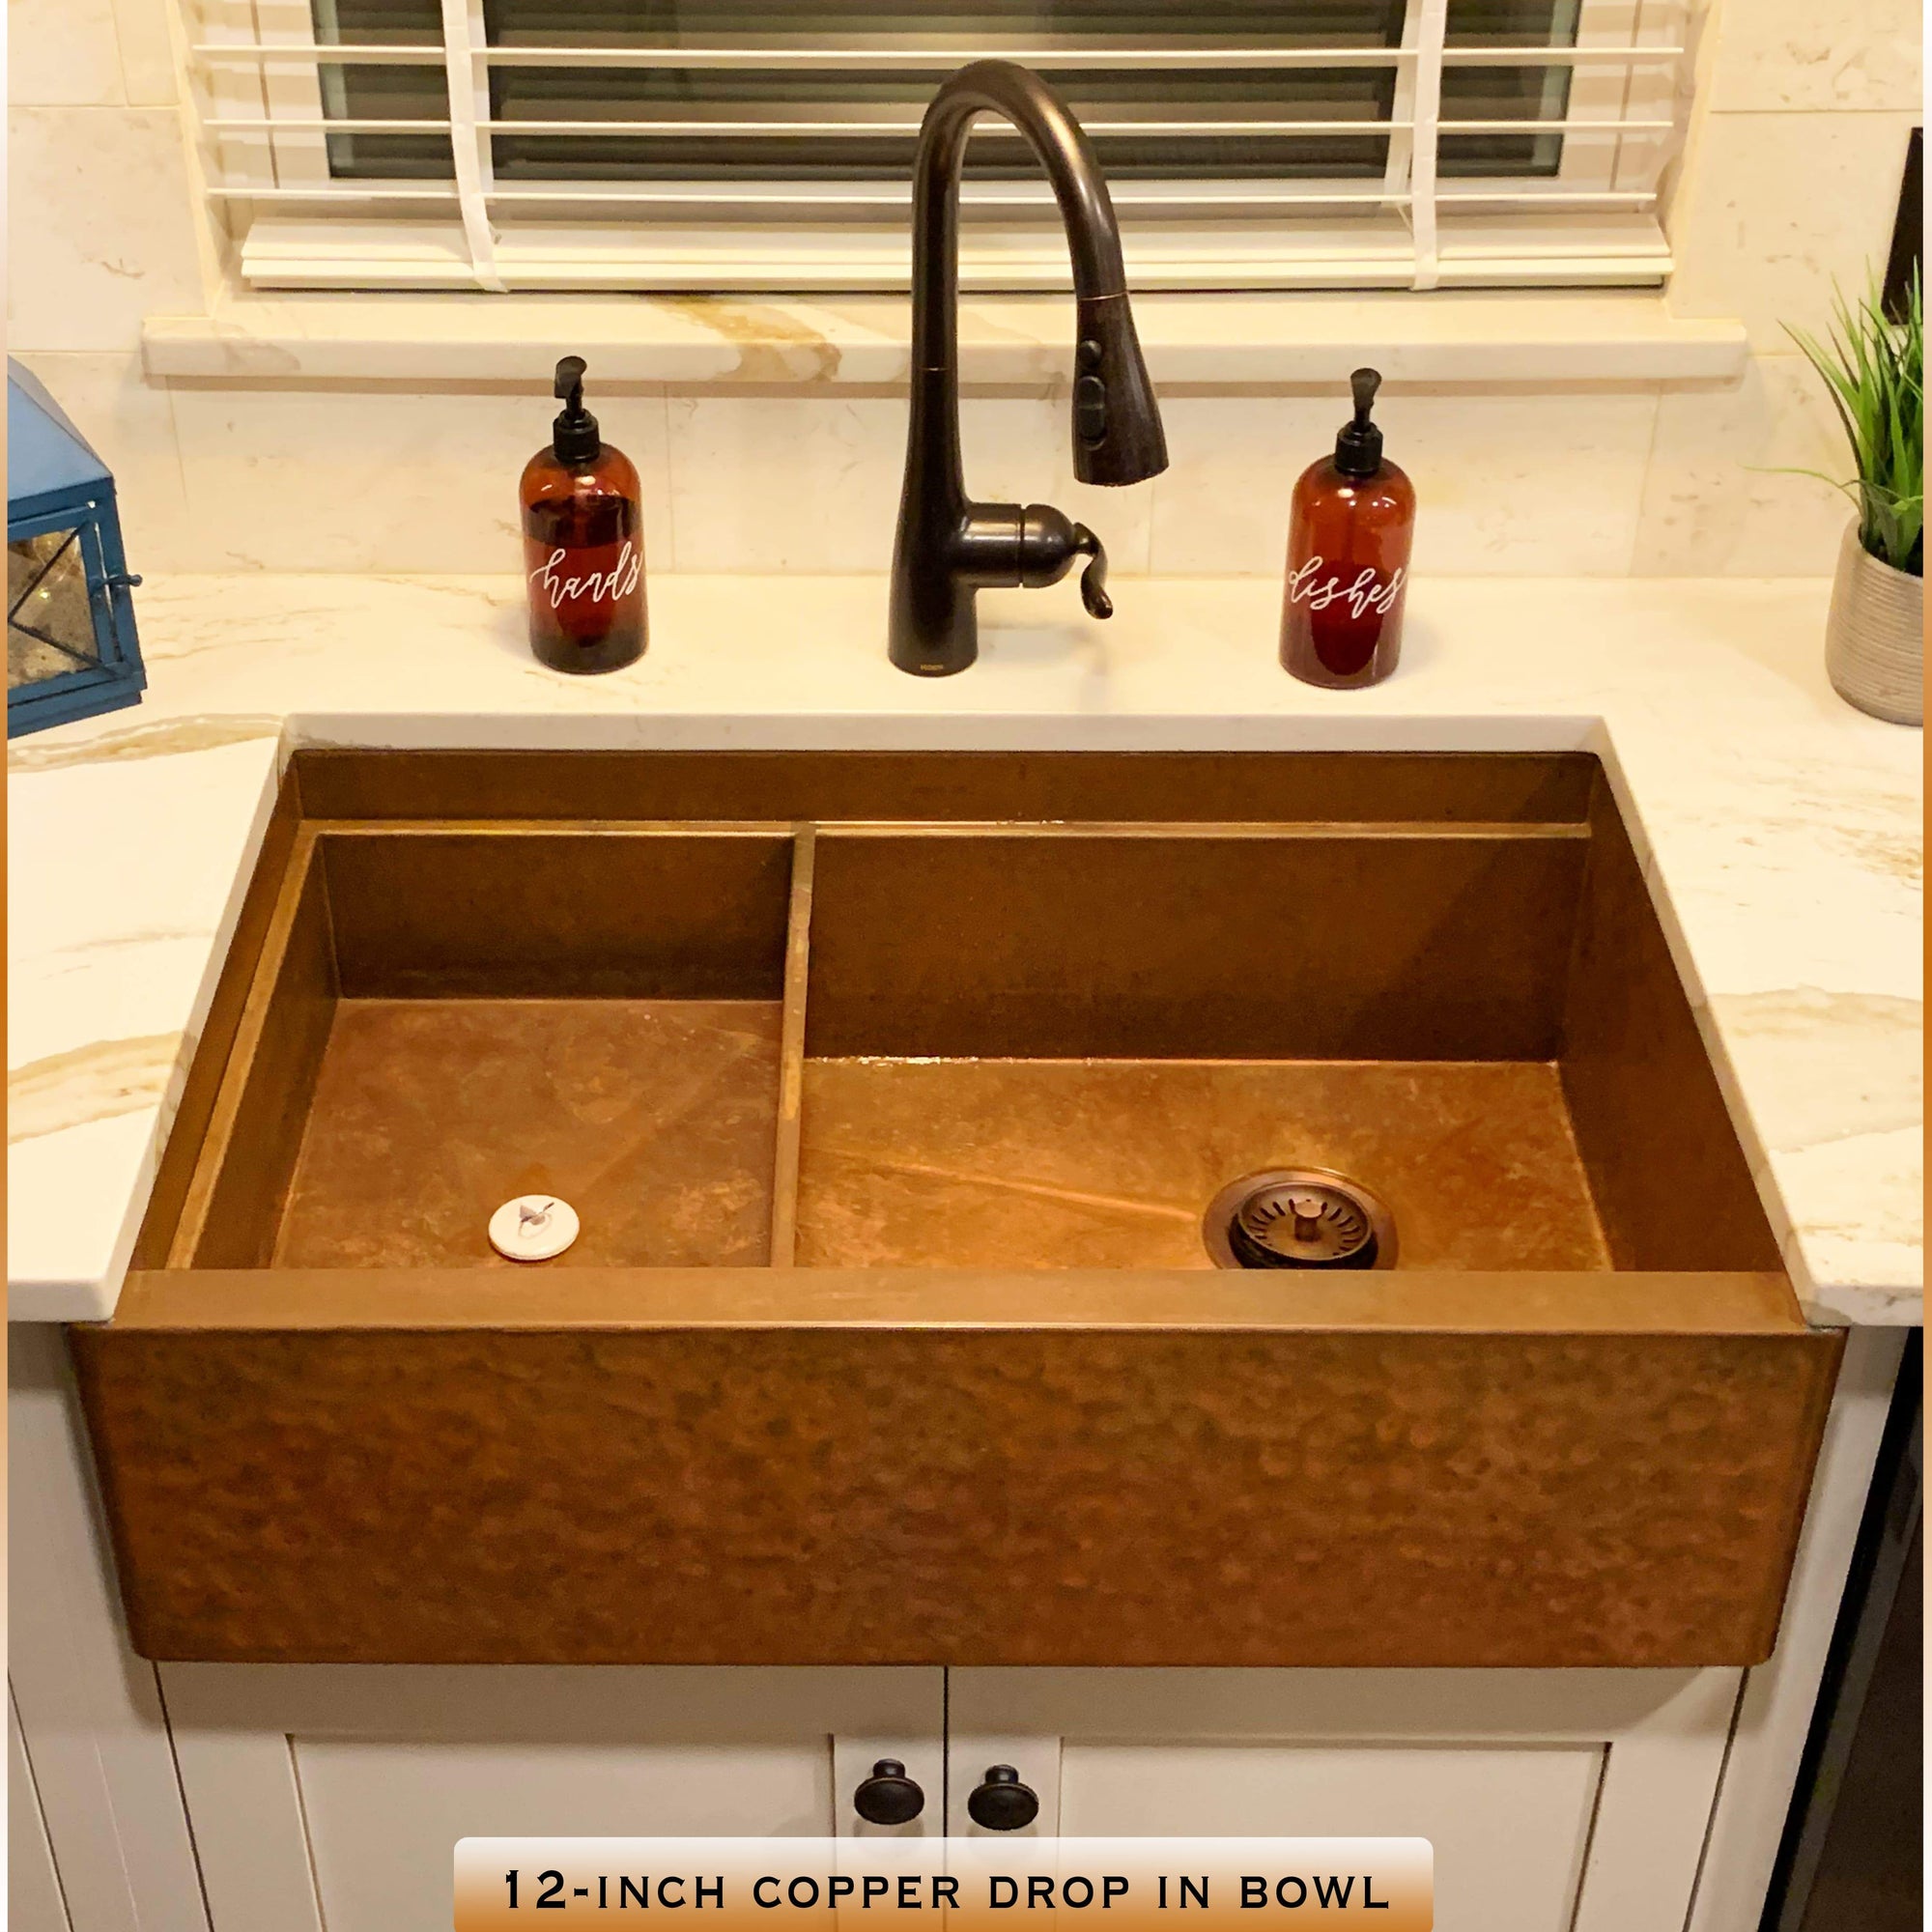 Hammered copper farmhouse sink with antique copper sink installed on right side of sink basin